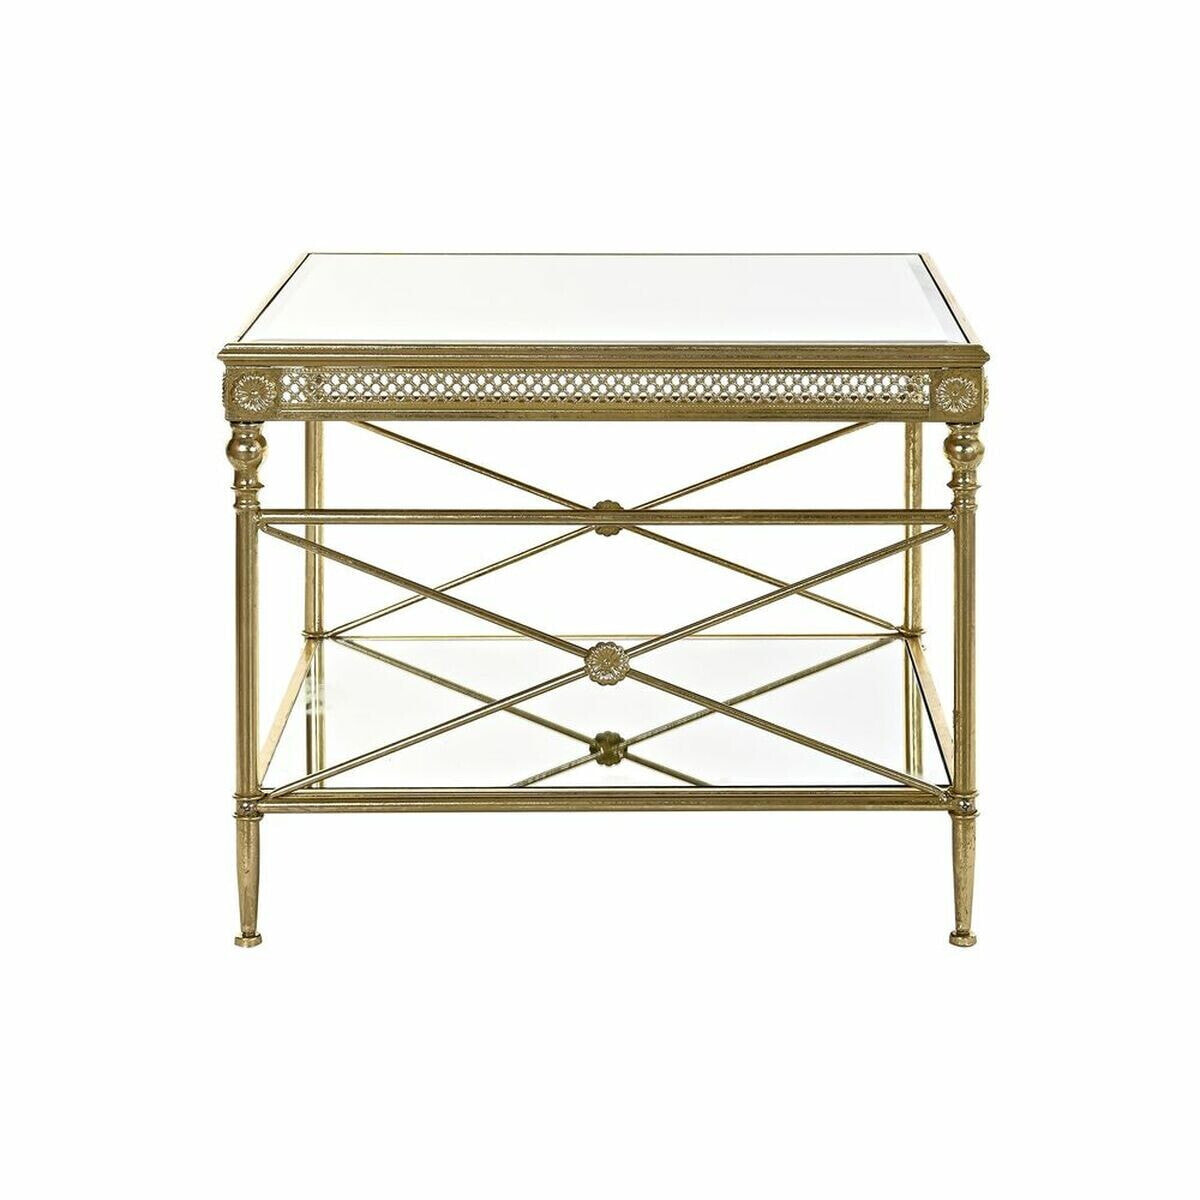 Side table DKD Home Decor 62 x 62 x 51 cm Mirror Golden Metal